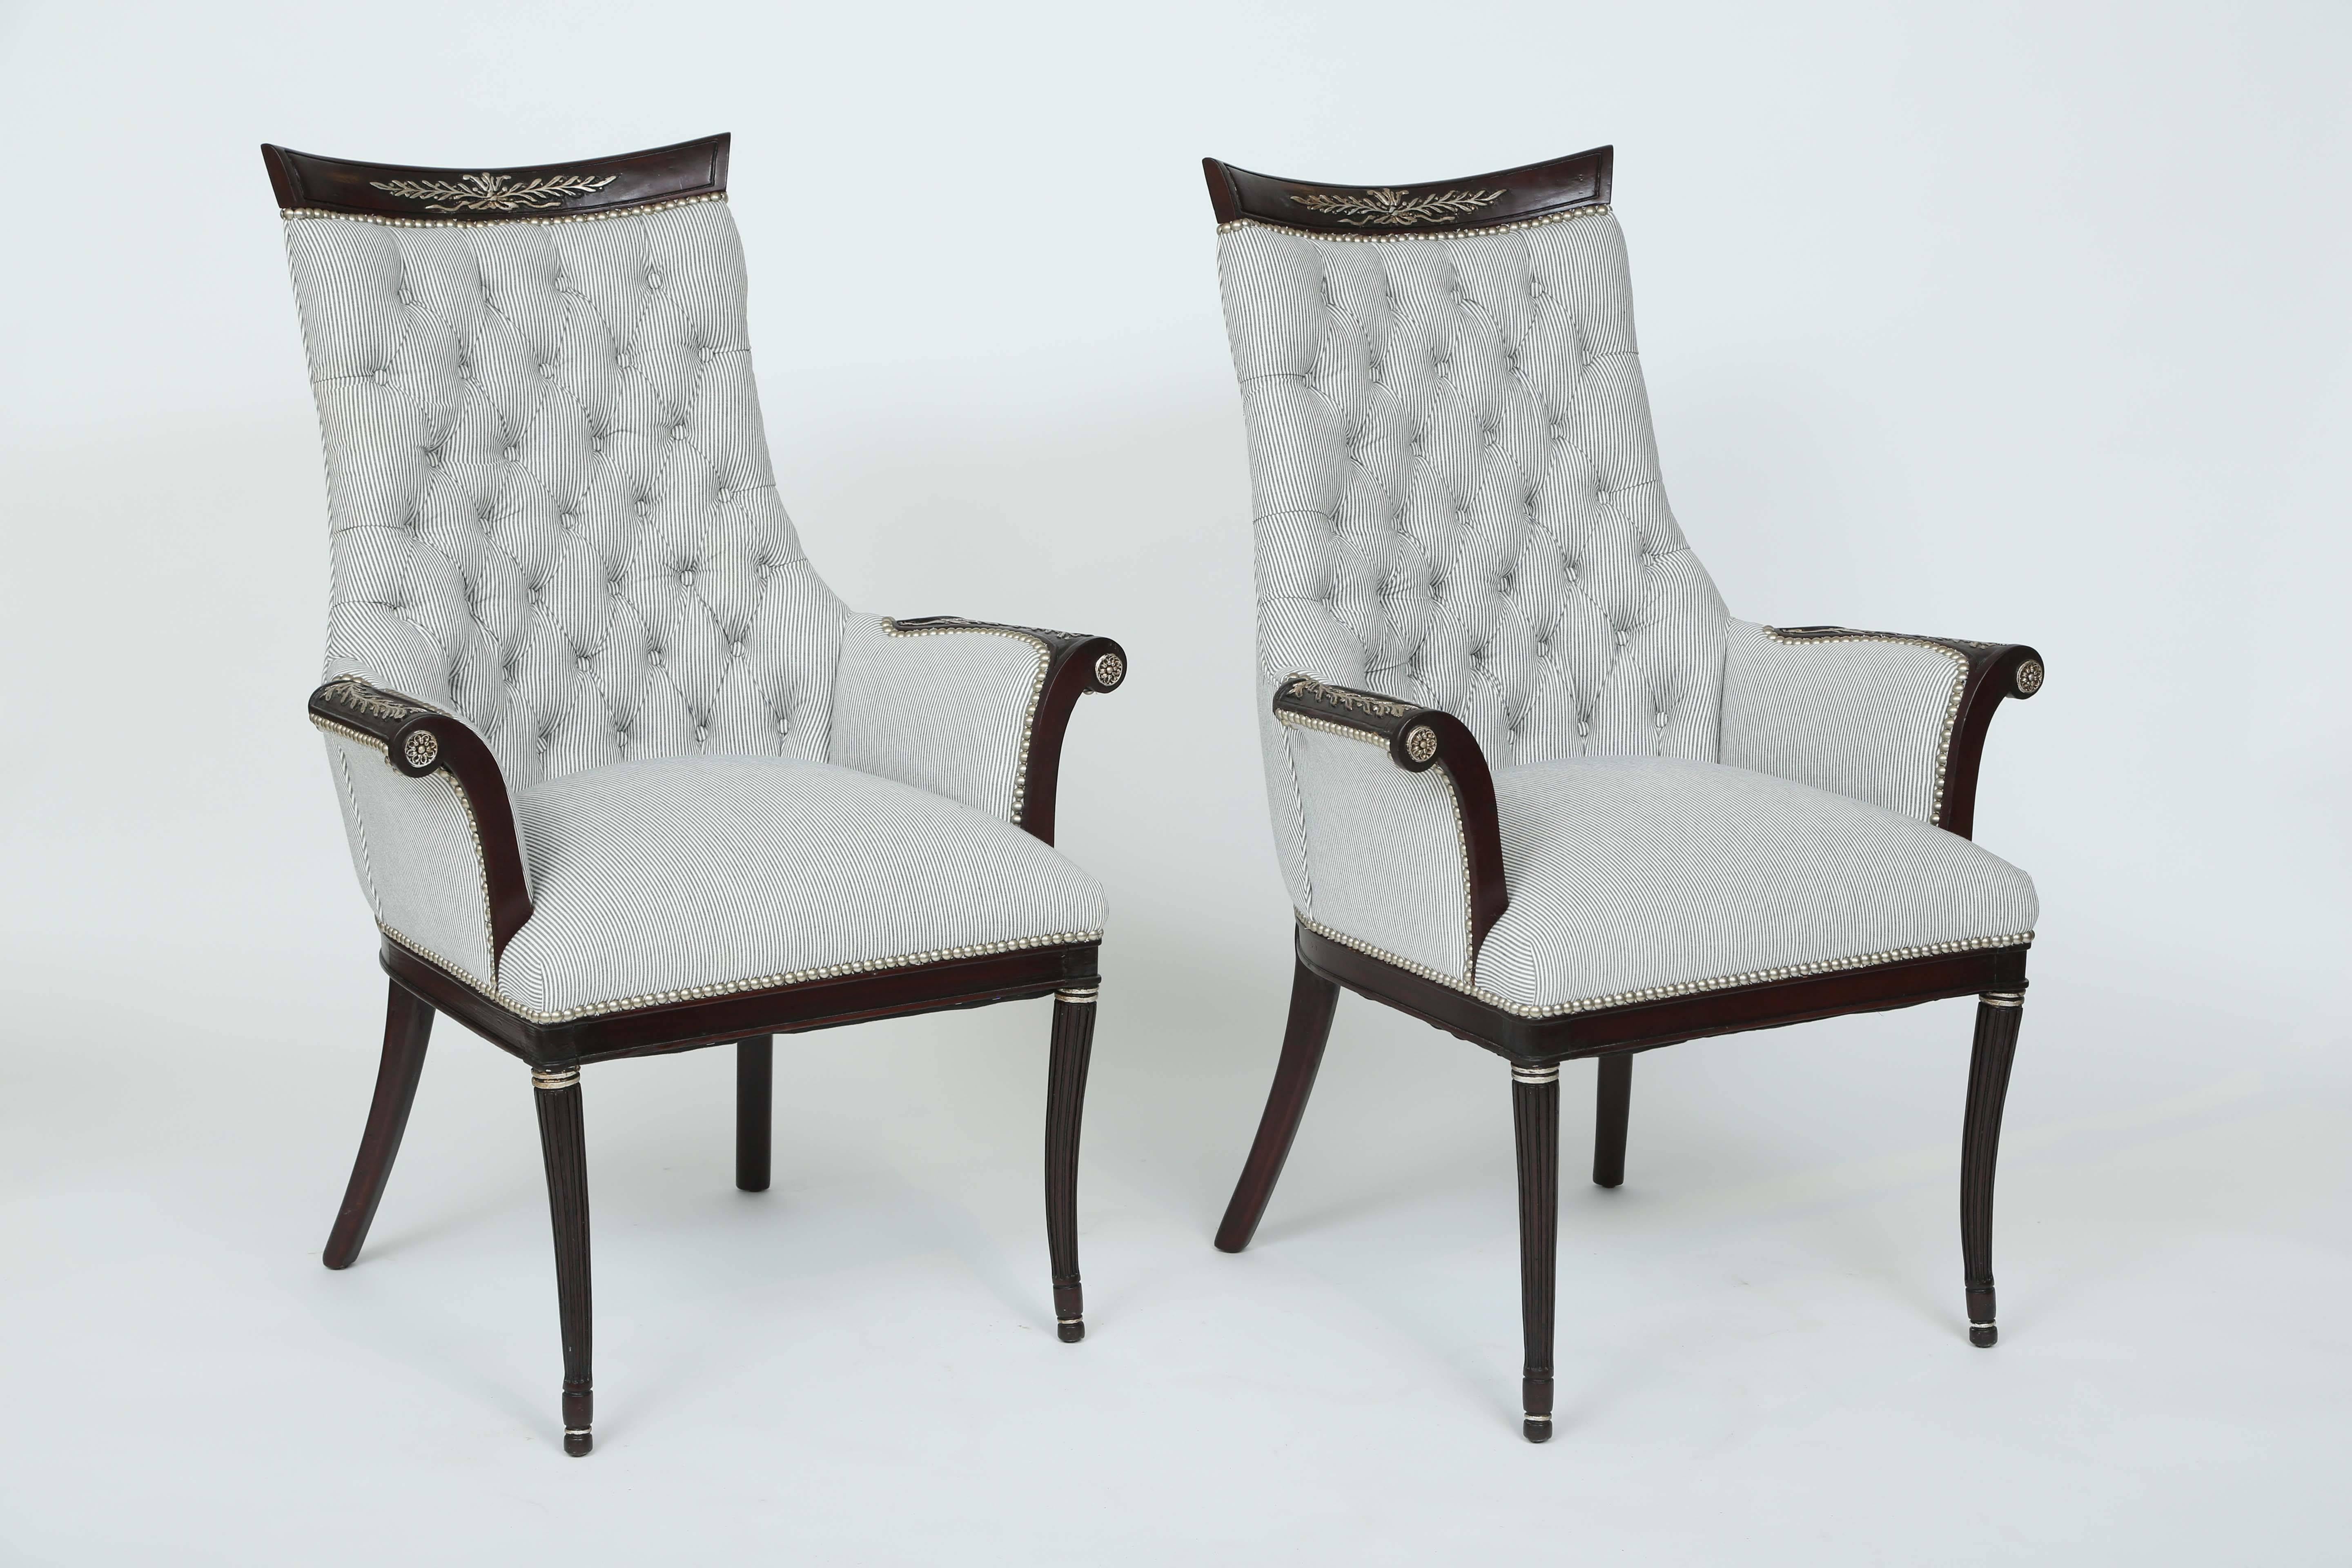 Pair of armchairs, having a black lacquered frame, each with a fielded bowed crestrail, centered by silver-gilt decoration of laureling, over shaped tufted backrest, out-scrolled upholstered arms with similar acanthine motifs on the elbow rests,